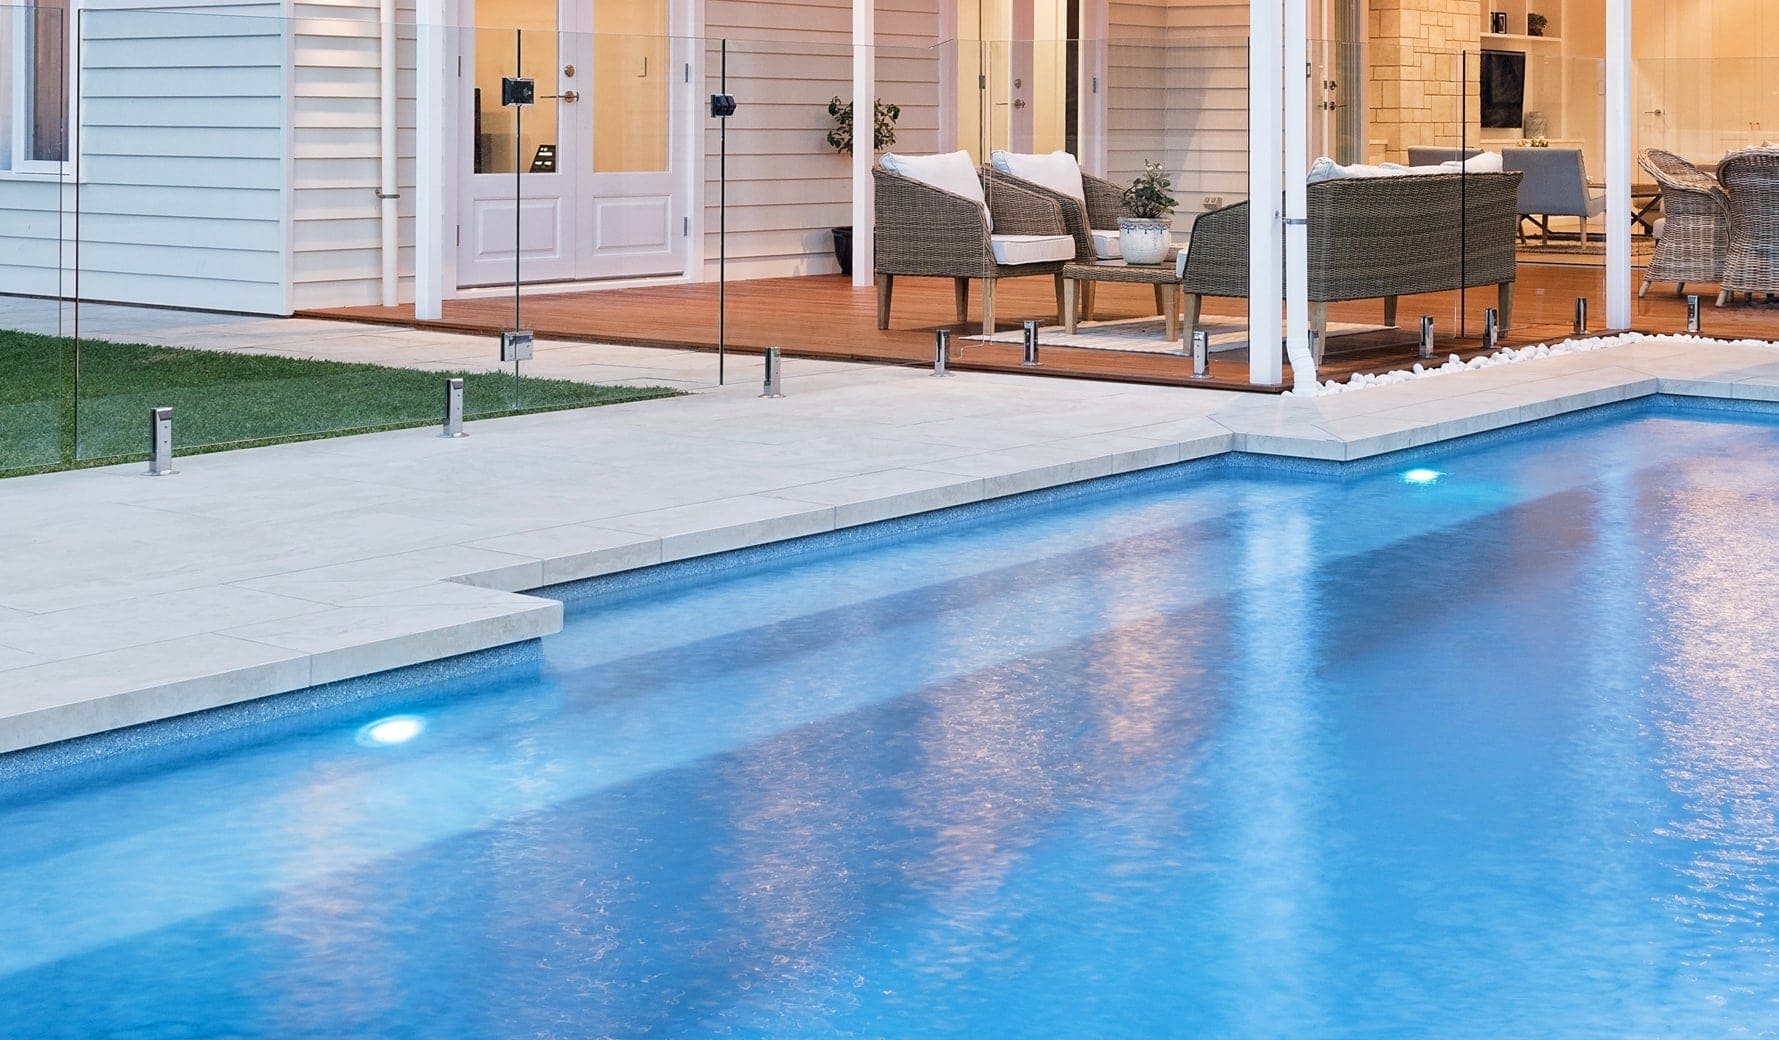 porcelain, pool coping, porcelain coping, safety, pool surround, outddor, tiles